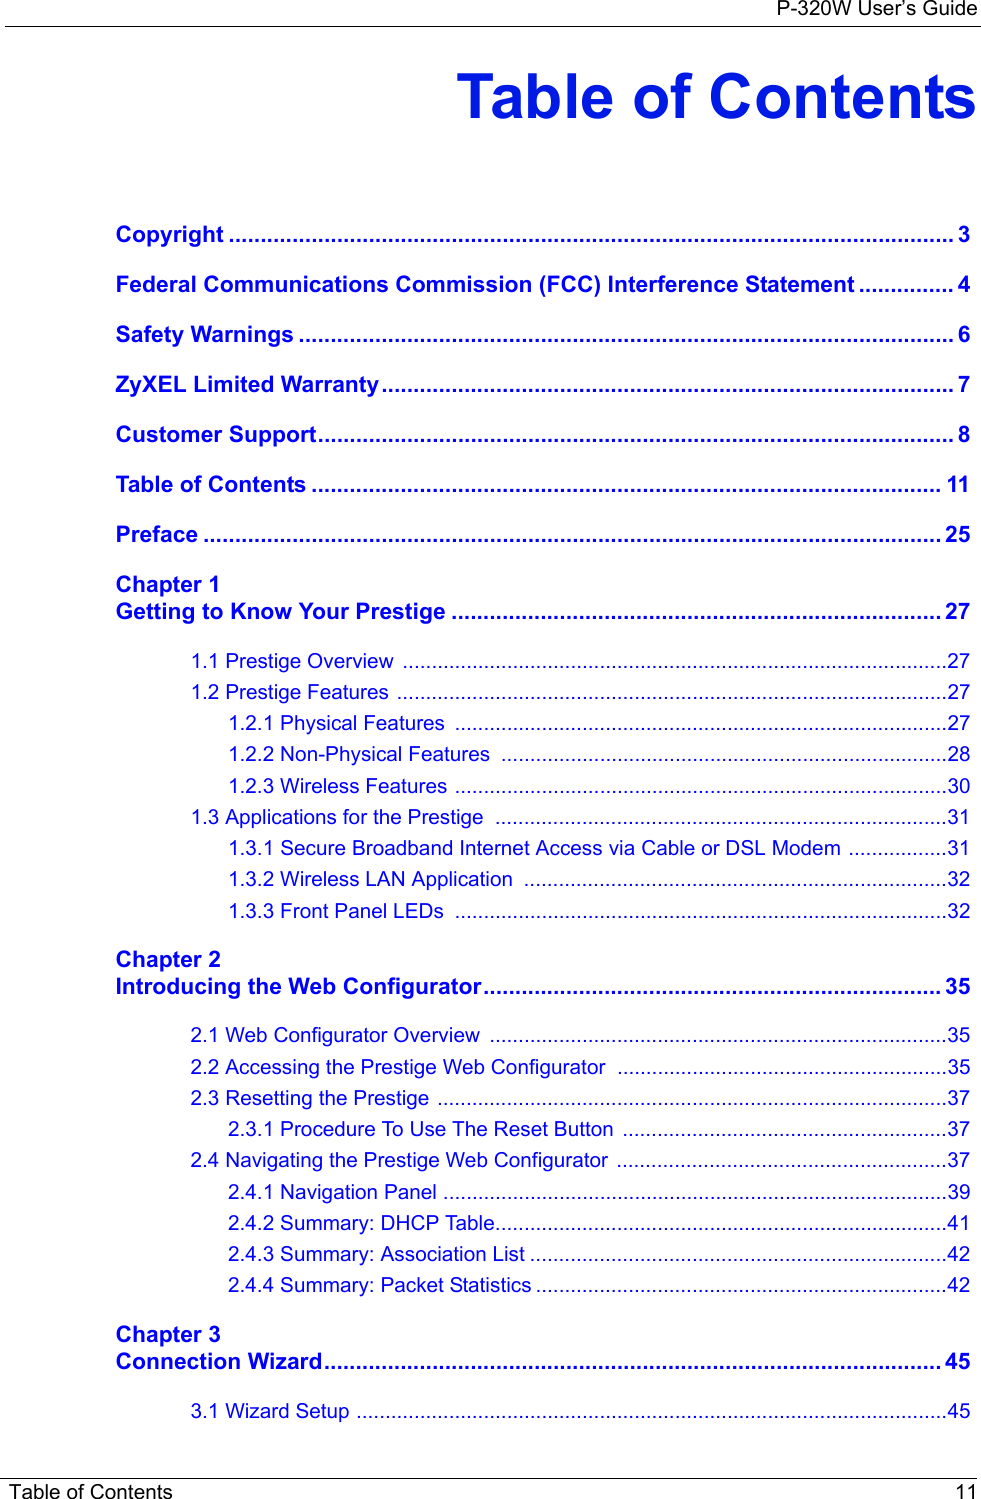 P-320W User’s Guide Table of Contents 11Table of ContentsCopyright .................................................................................................................. 3Federal Communications Commission (FCC) Interference Statement ............... 4Safety Warnings ....................................................................................................... 6ZyXEL Limited Warranty.......................................................................................... 7Customer Support.................................................................................................... 8Table of Contents ................................................................................................... 11Preface .................................................................................................................... 25Chapter 1Getting to Know Your Prestige ............................................................................. 271.1 Prestige Overview  ..............................................................................................271.2 Prestige Features ...............................................................................................271.2.1 Physical Features  .....................................................................................271.2.2 Non-Physical Features  .............................................................................281.2.3 Wireless Features .....................................................................................301.3 Applications for the Prestige  ..............................................................................311.3.1 Secure Broadband Internet Access via Cable or DSL Modem .................311.3.2 Wireless LAN Application  .........................................................................321.3.3 Front Panel LEDs  .....................................................................................32Chapter 2Introducing the Web Configurator........................................................................ 352.1 Web Configurator Overview  ...............................................................................352.2 Accessing the Prestige Web Configurator .........................................................352.3 Resetting the Prestige ........................................................................................372.3.1 Procedure To Use The Reset Button  ........................................................372.4 Navigating the Prestige Web Configurator  .........................................................372.4.1 Navigation Panel .......................................................................................392.4.2 Summary: DHCP Table..............................................................................412.4.3 Summary: Association List ........................................................................422.4.4 Summary: Packet Statistics .......................................................................42Chapter 3Connection Wizard................................................................................................. 453.1 Wizard Setup ......................................................................................................45